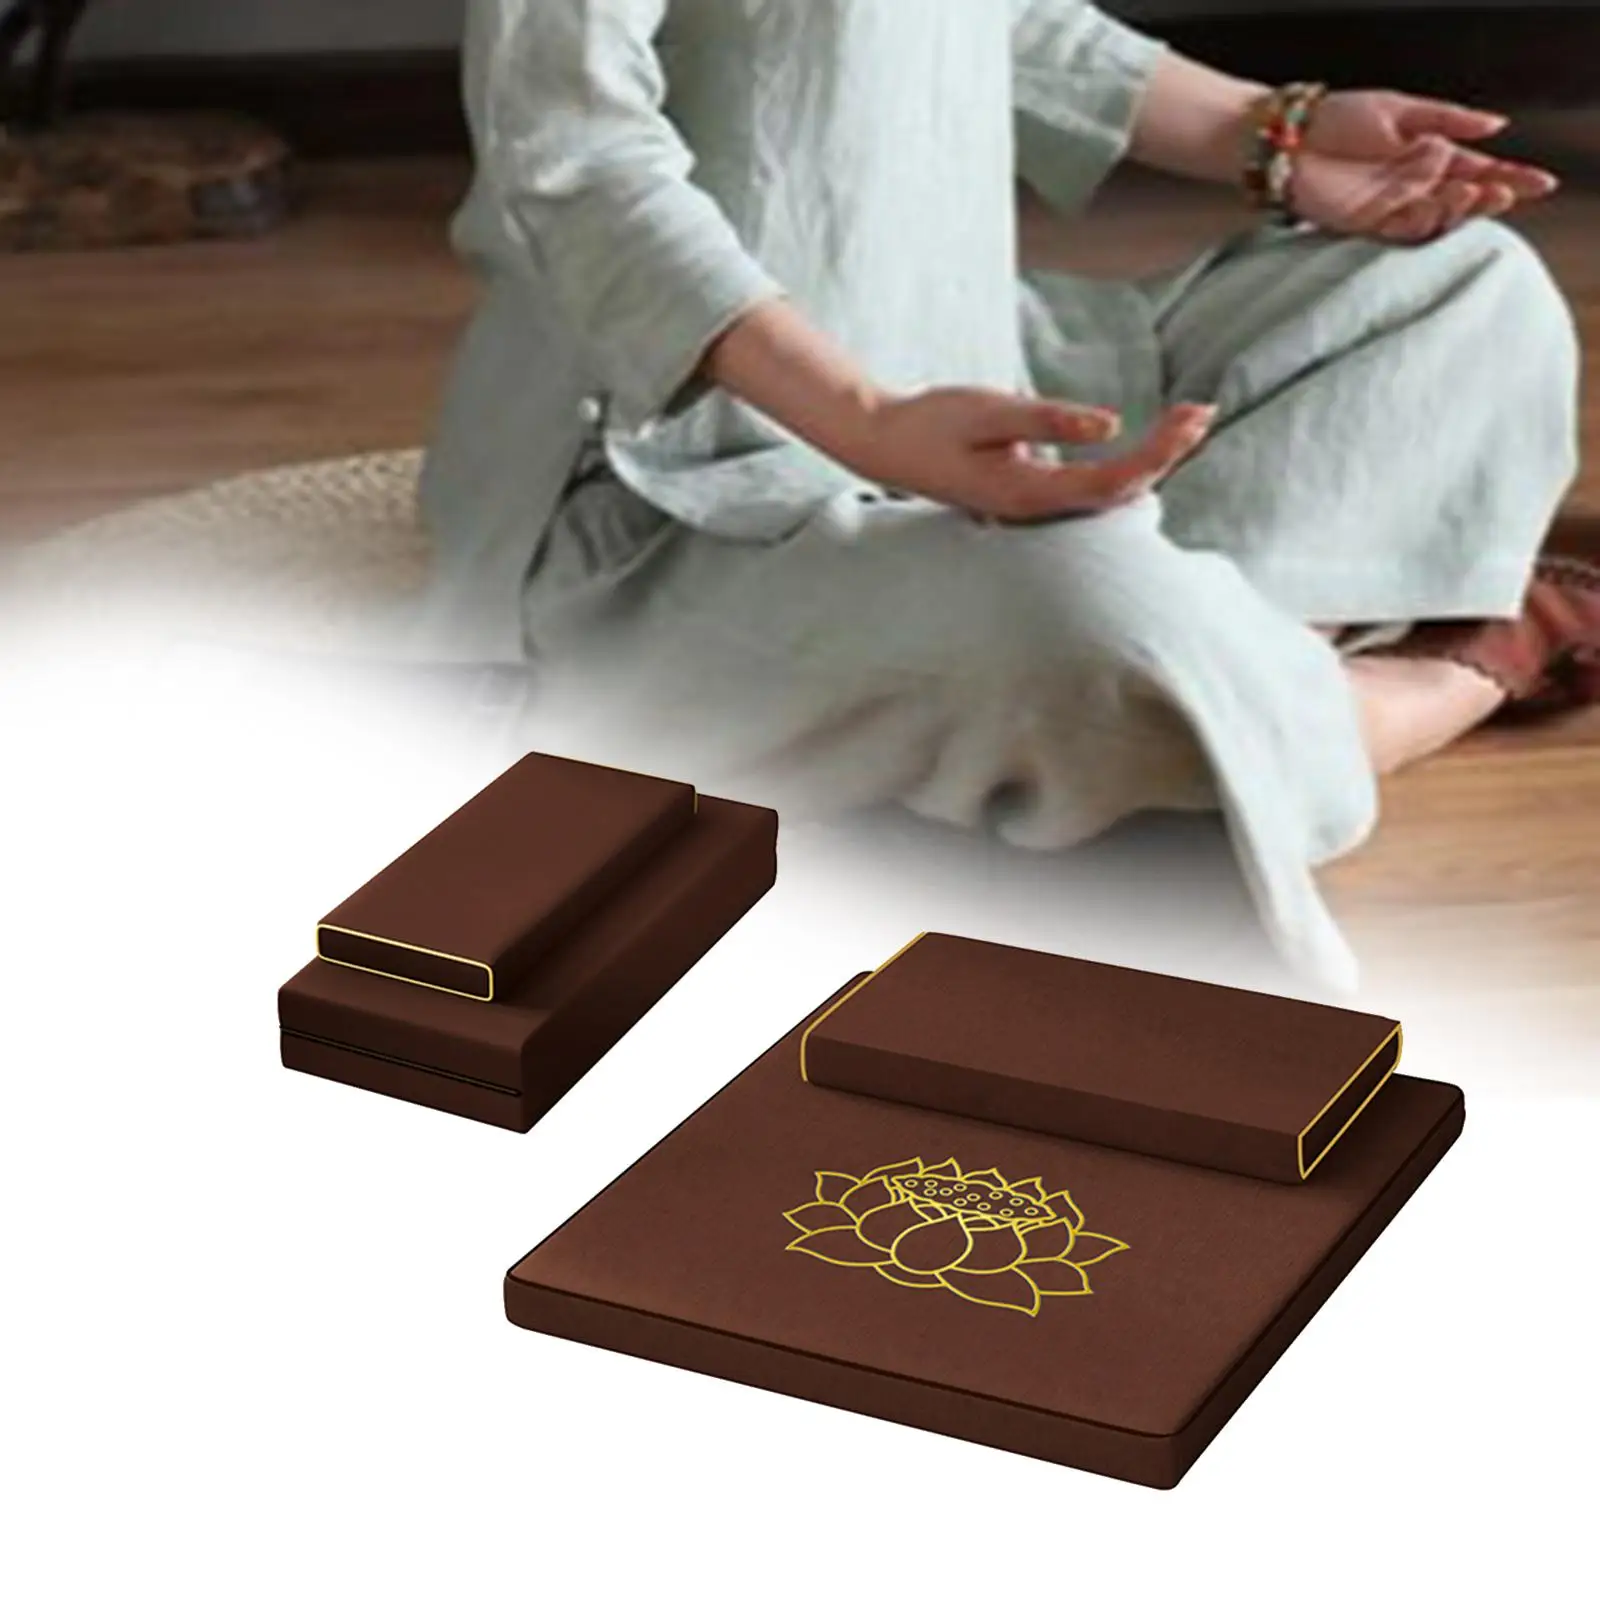 2 Pieces Portable Meditation Cushion Set Home Decor Comfort Large Square Pad for Footstool Dining Chair Living Room Balcony Yoga